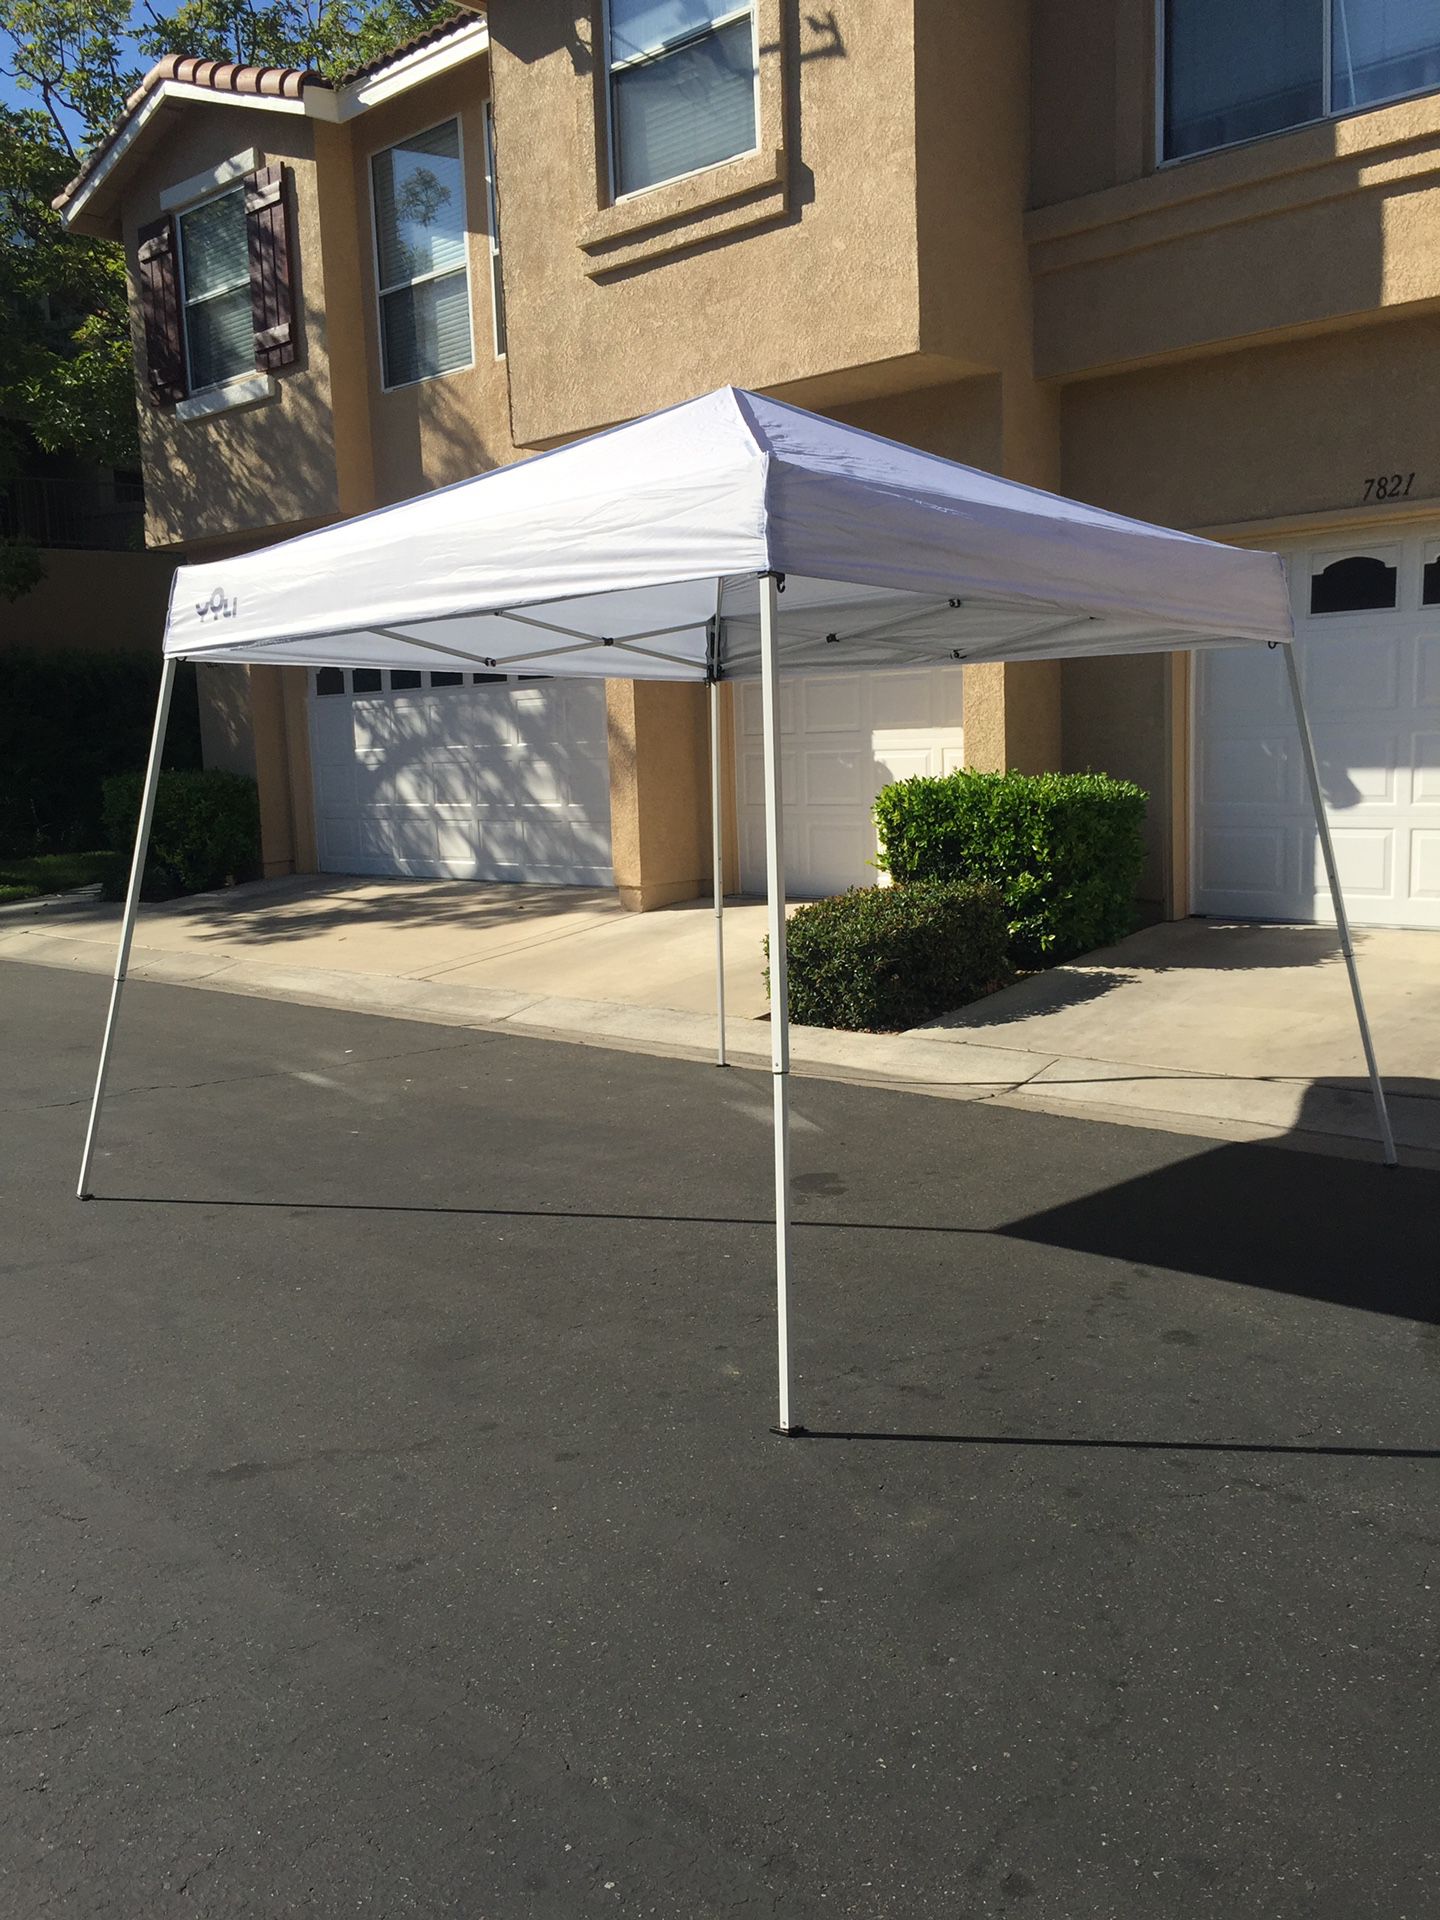 YOLI Brand Canopy, 10x10 Wesport Model, Included Carrying Bag